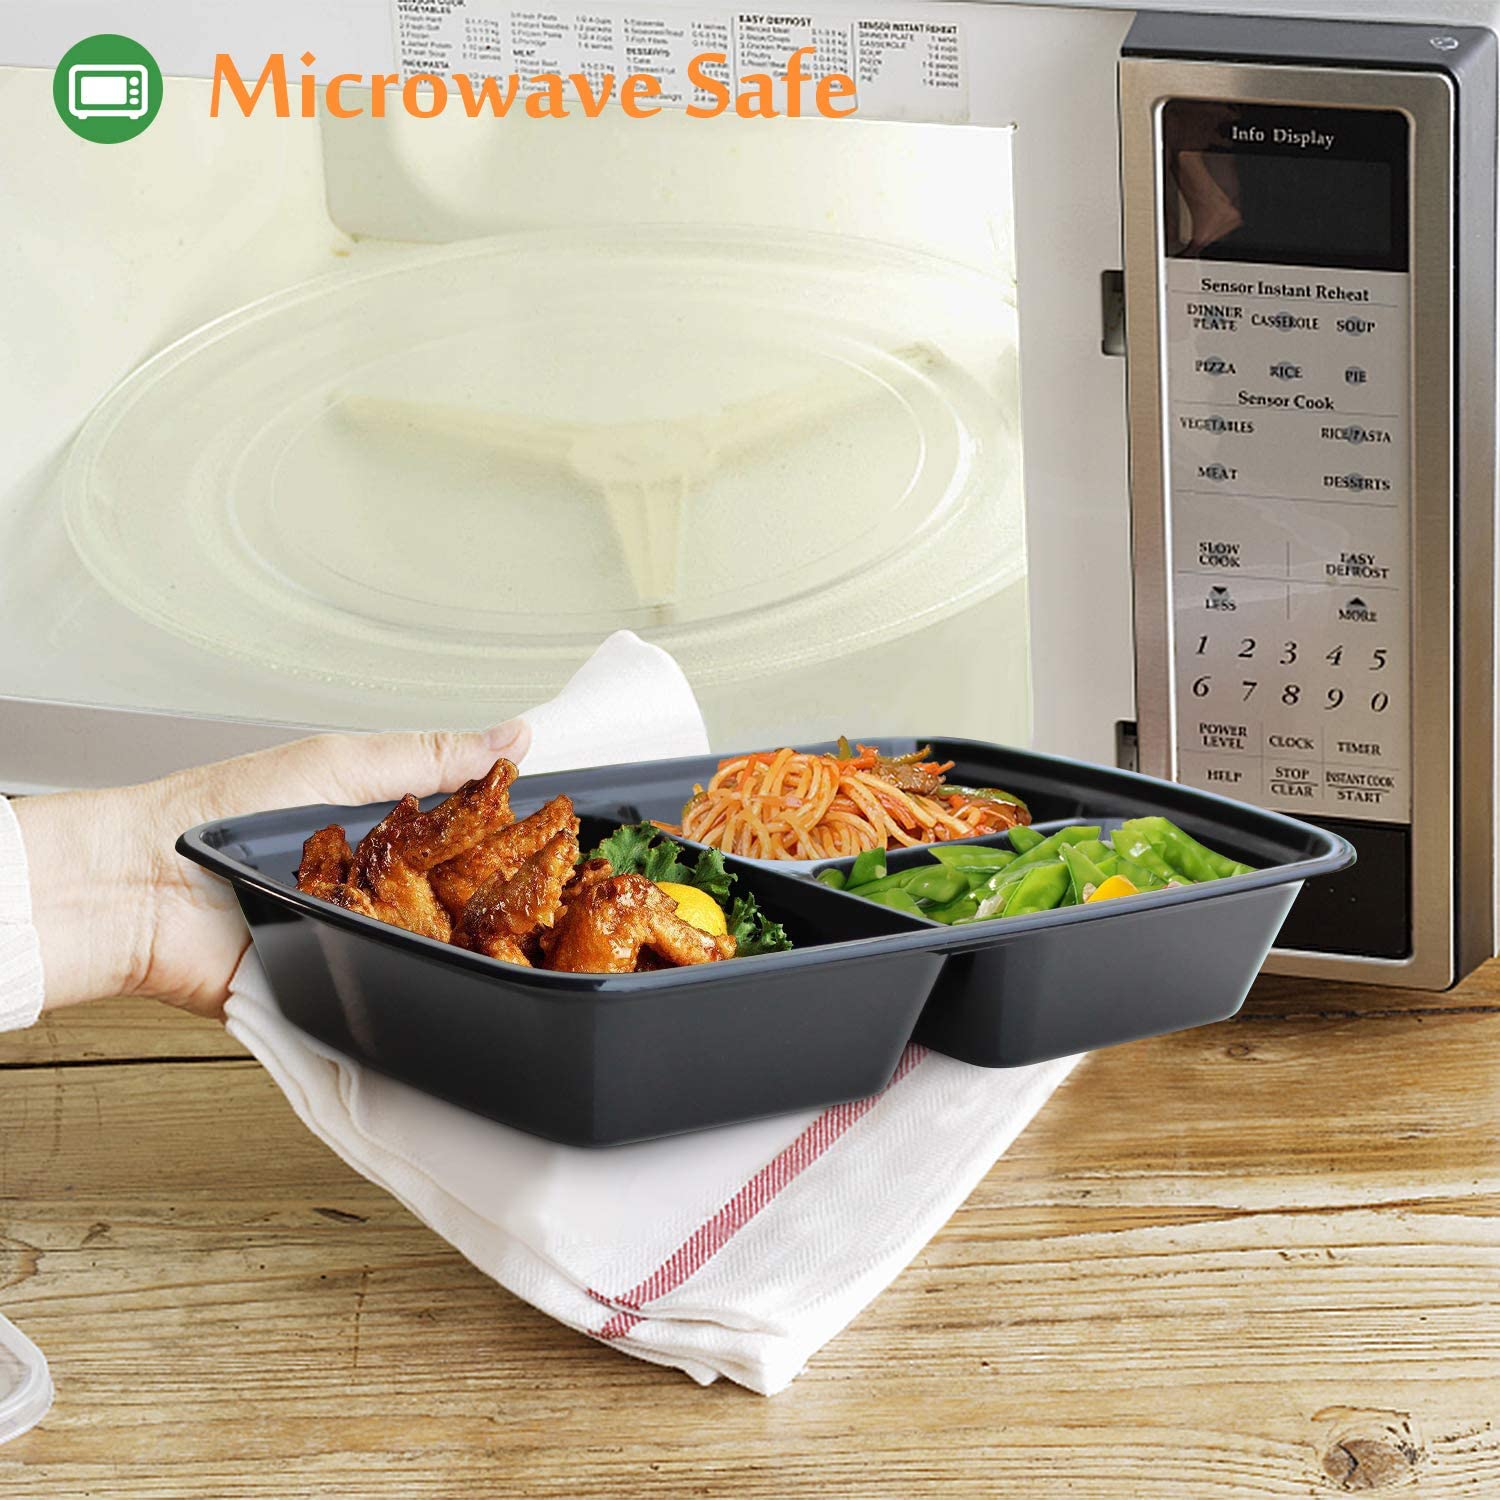 Are your microwave containers safe